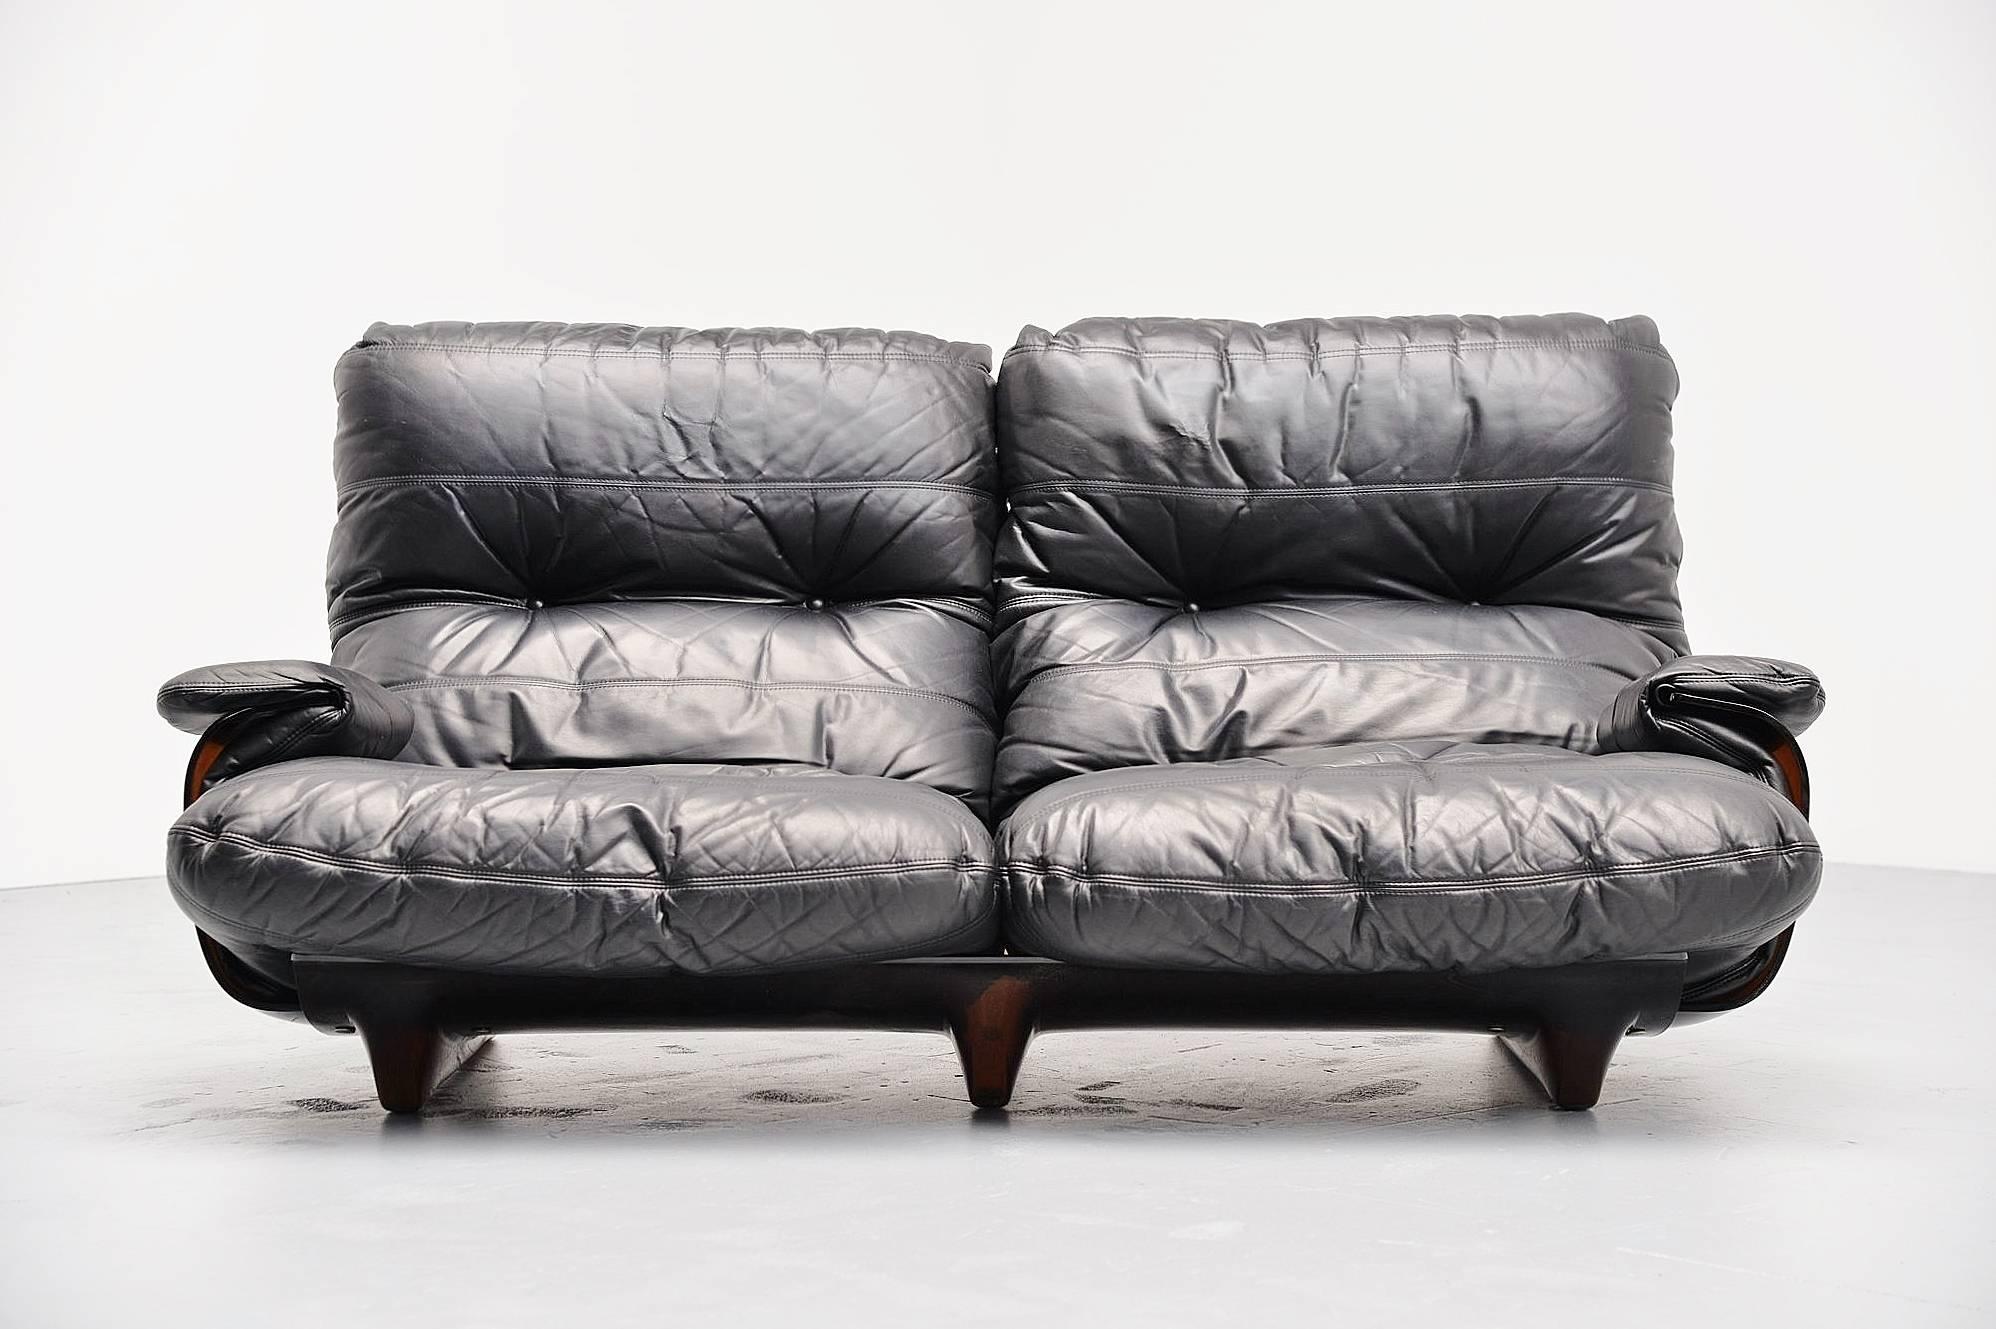 Large lounge sofa designed by Michel Ducaroy, manufactured by Ligne Roset, France, 1970. This is from the Marsala series and this has a brown plexiglass base and very cosy black leather cushions. Super comfortable lounge sofa in high quality